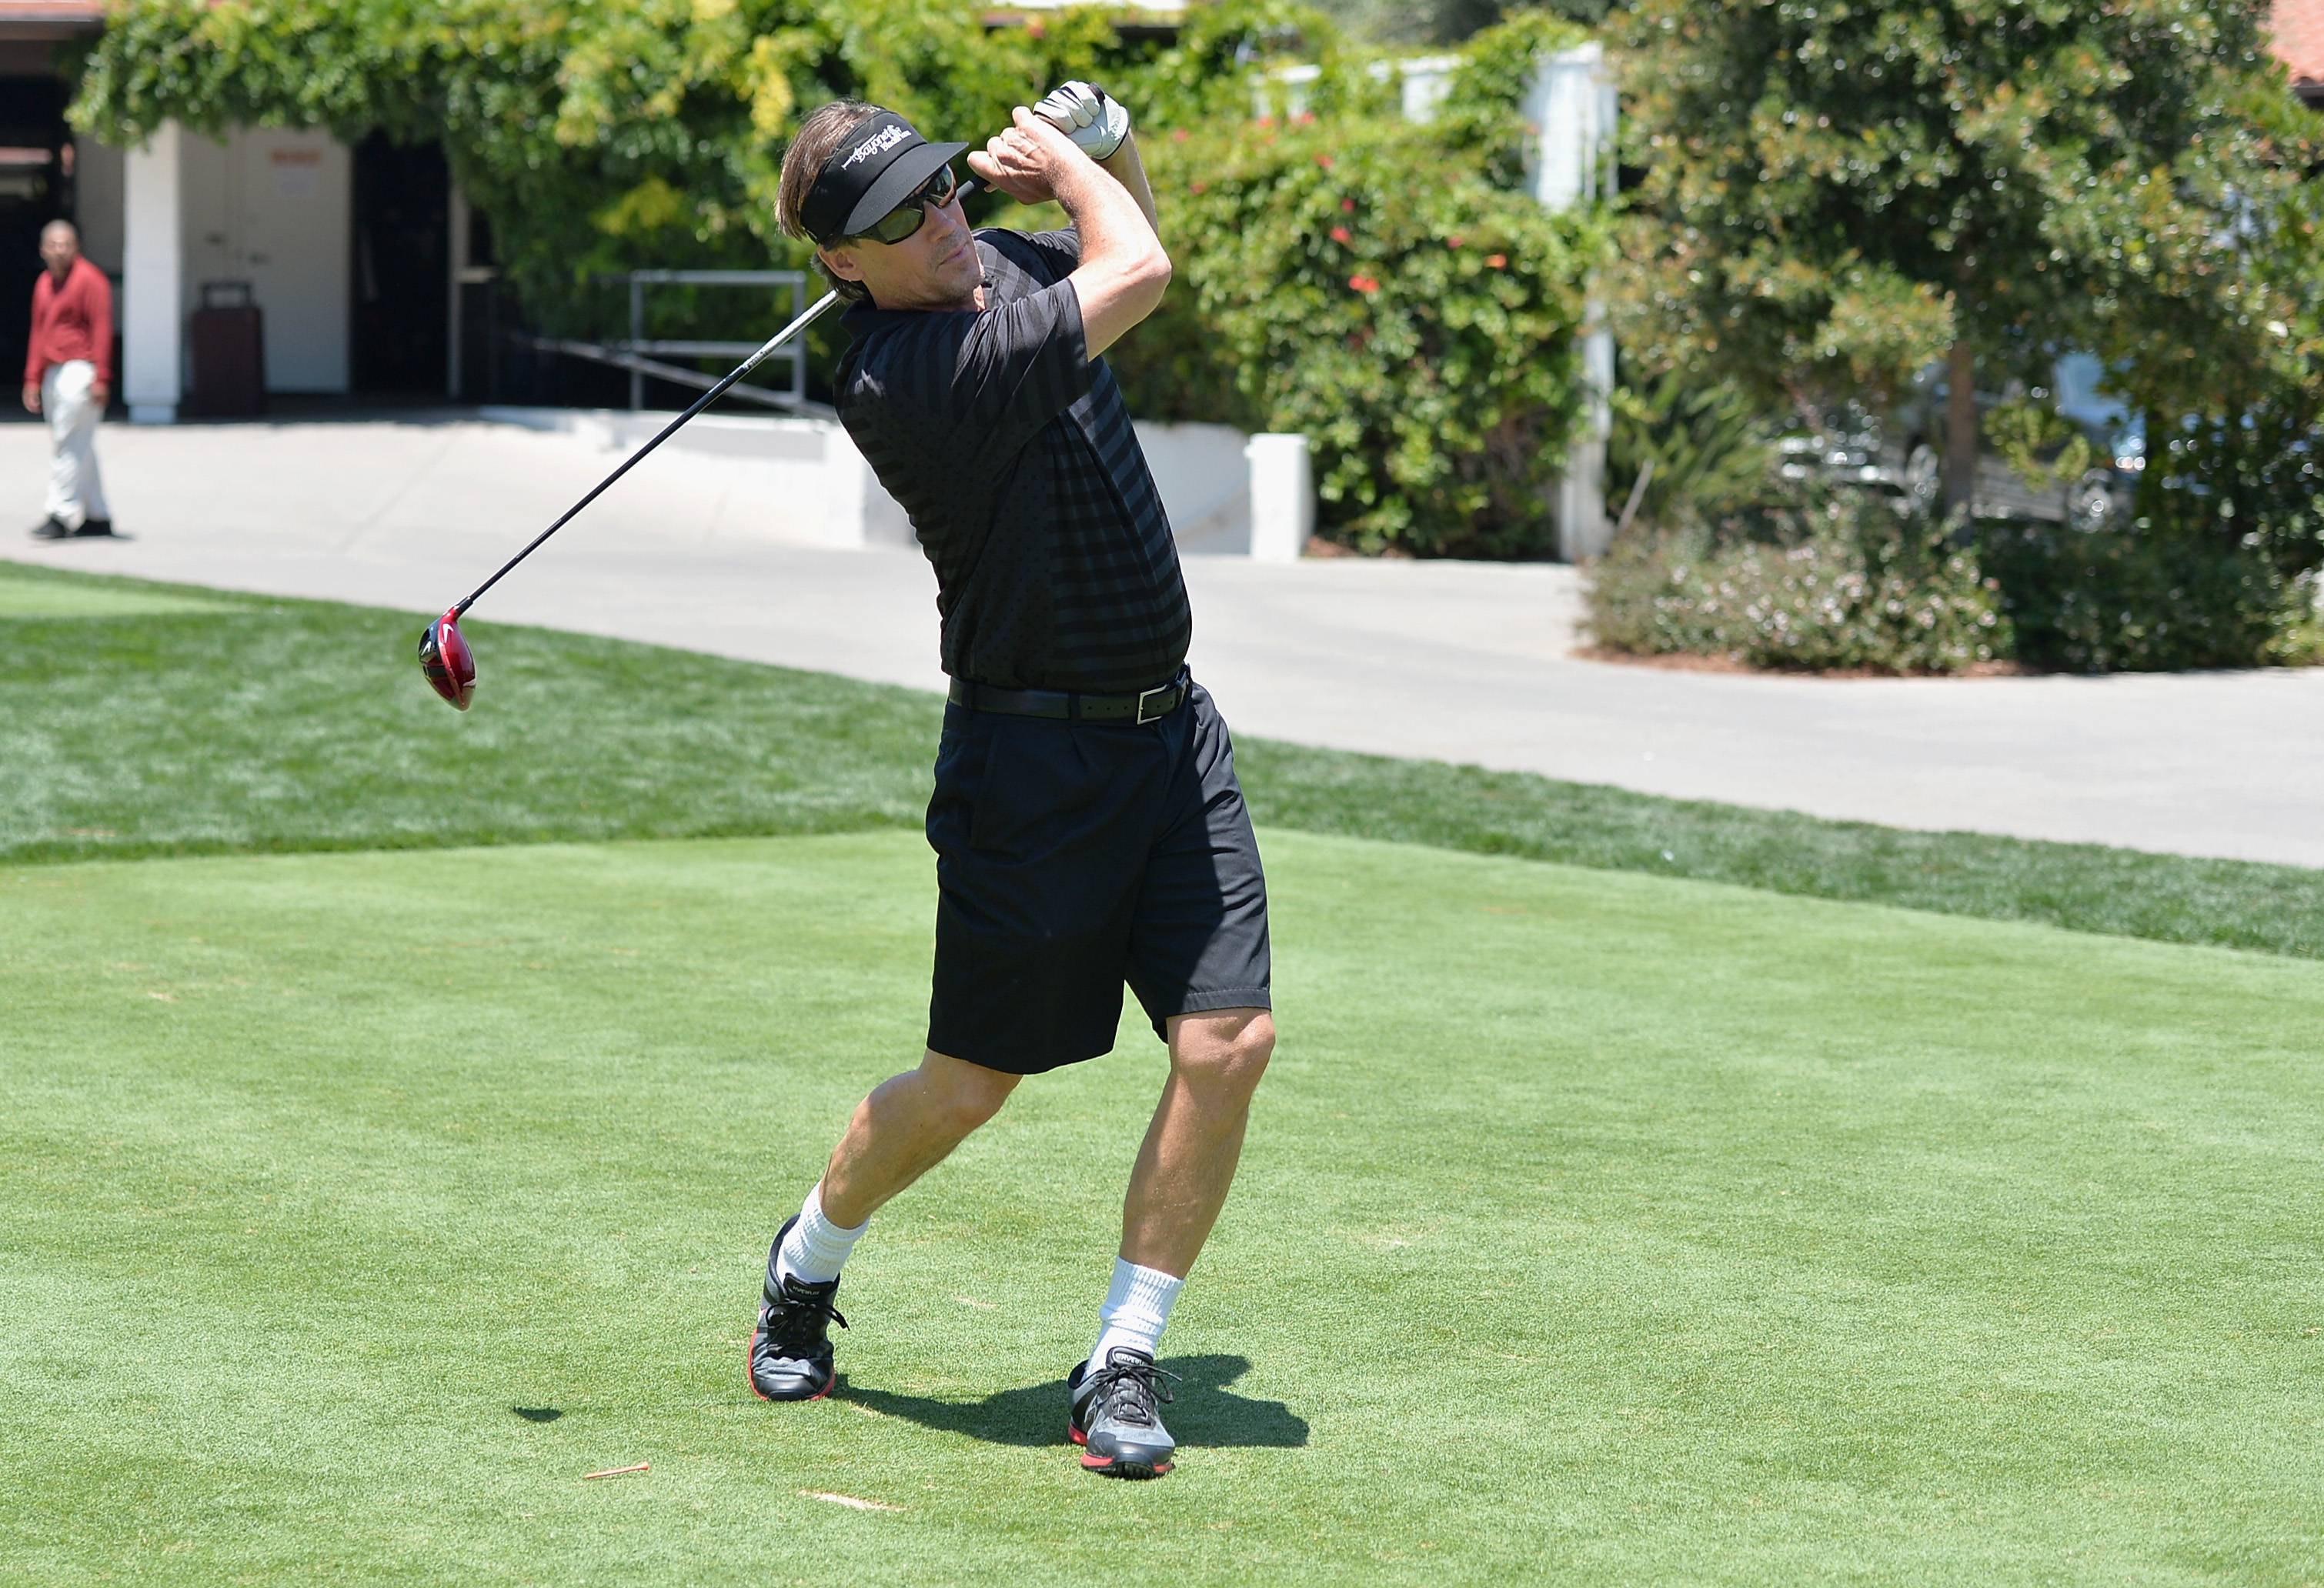 Screen Actors Guild Foundation 4th Annual Los Angeles Golf Classic